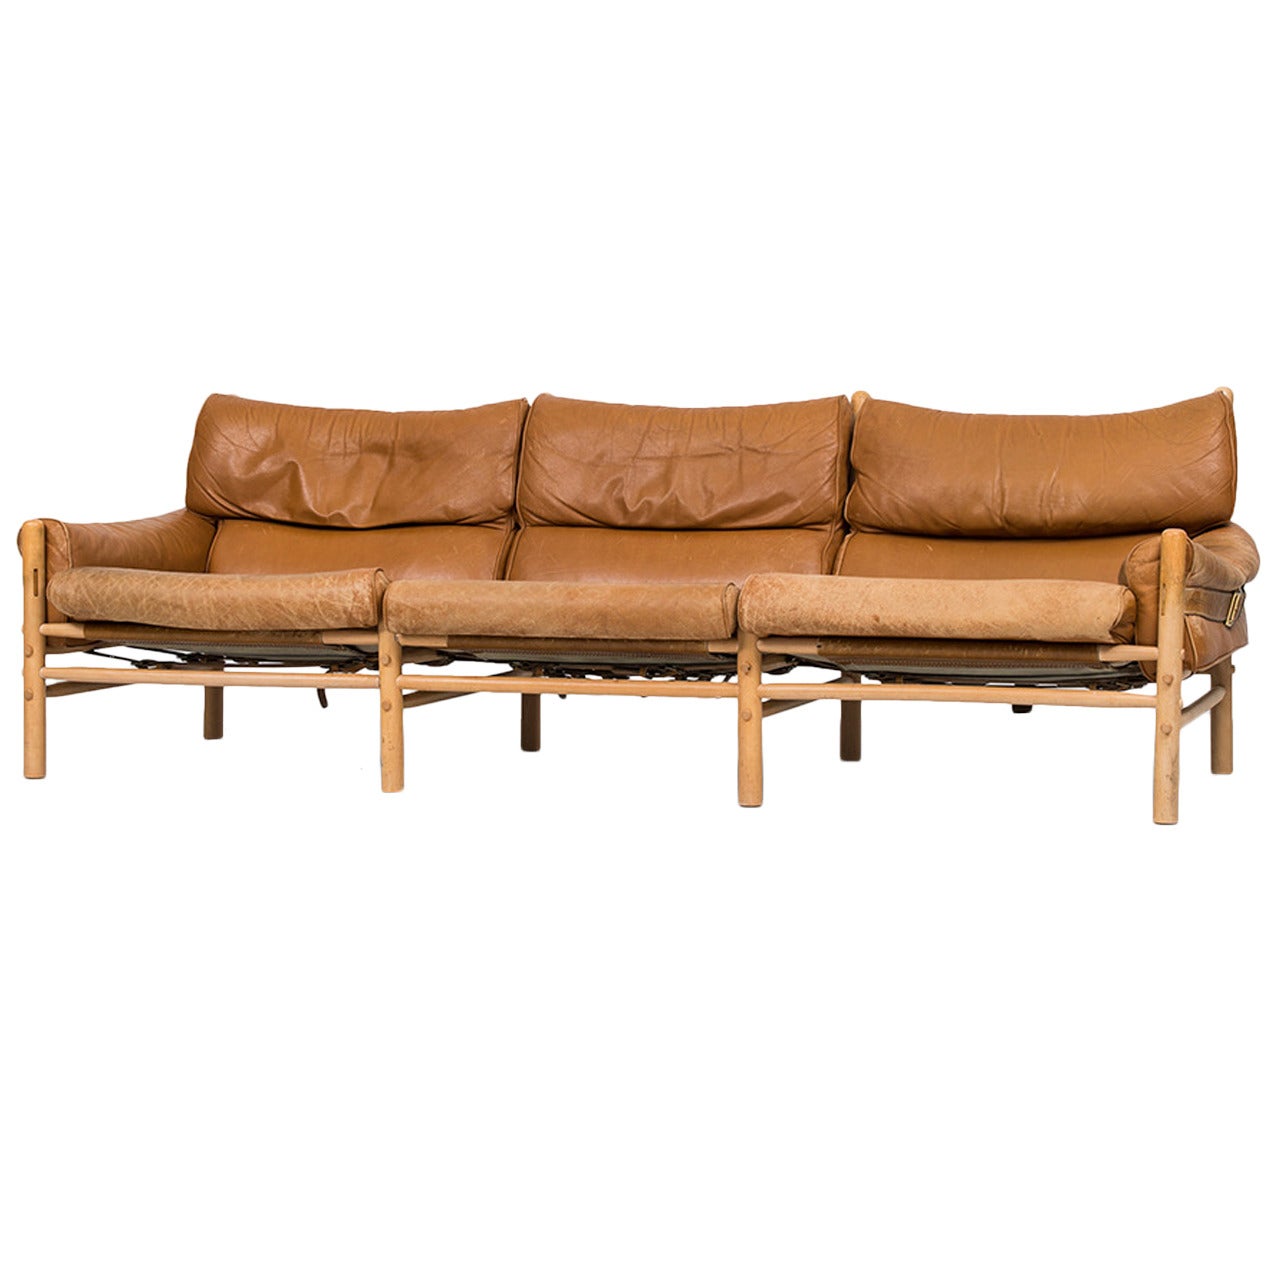 Arne Norell Kontiki sofa by Arne Norell AB in Aneby, Sweden